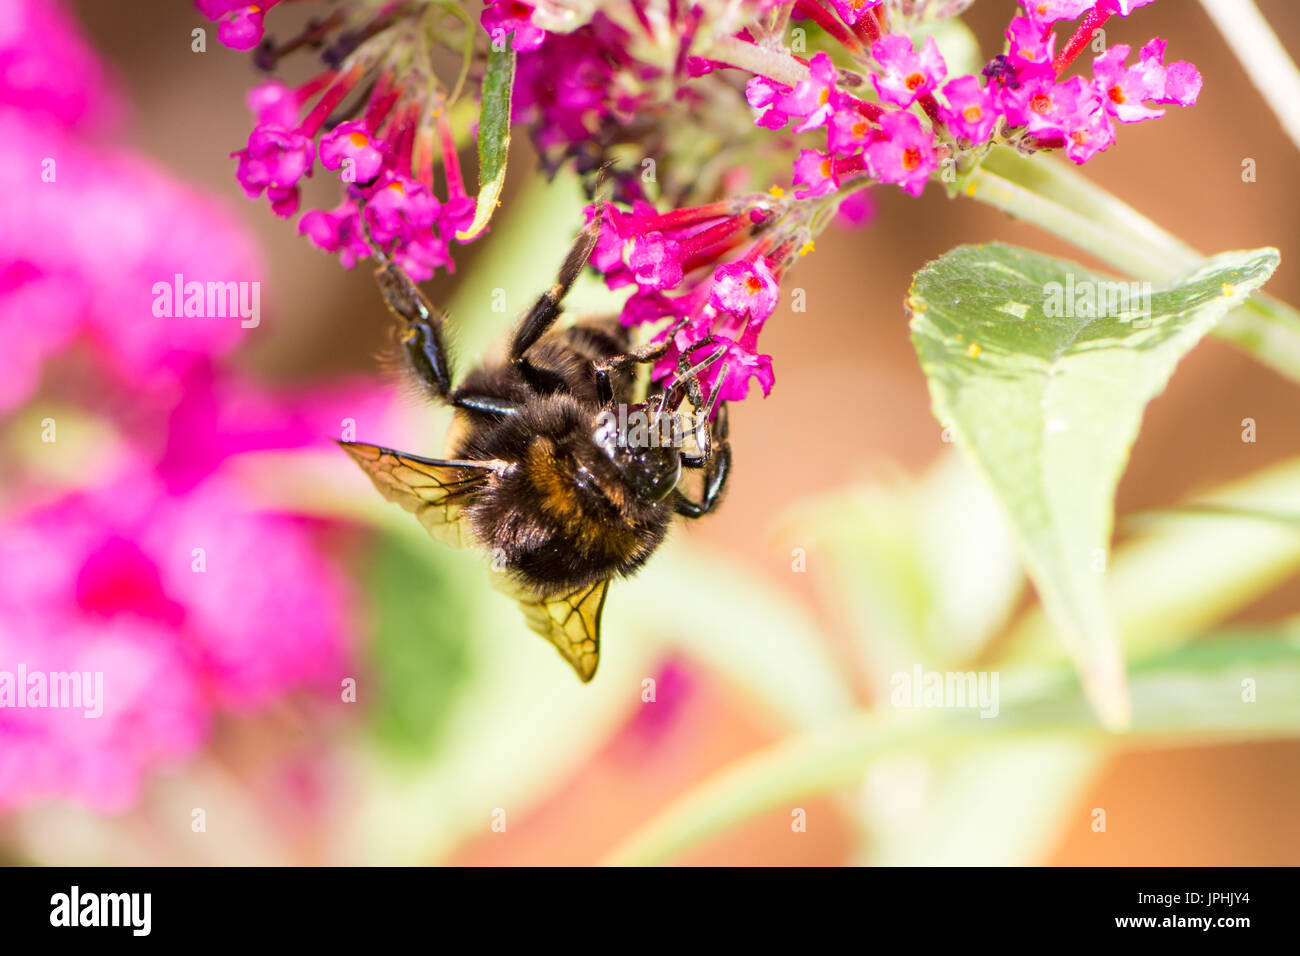 Macro of a bumblebee collecting nectar at a budleja blossom Stock Photo